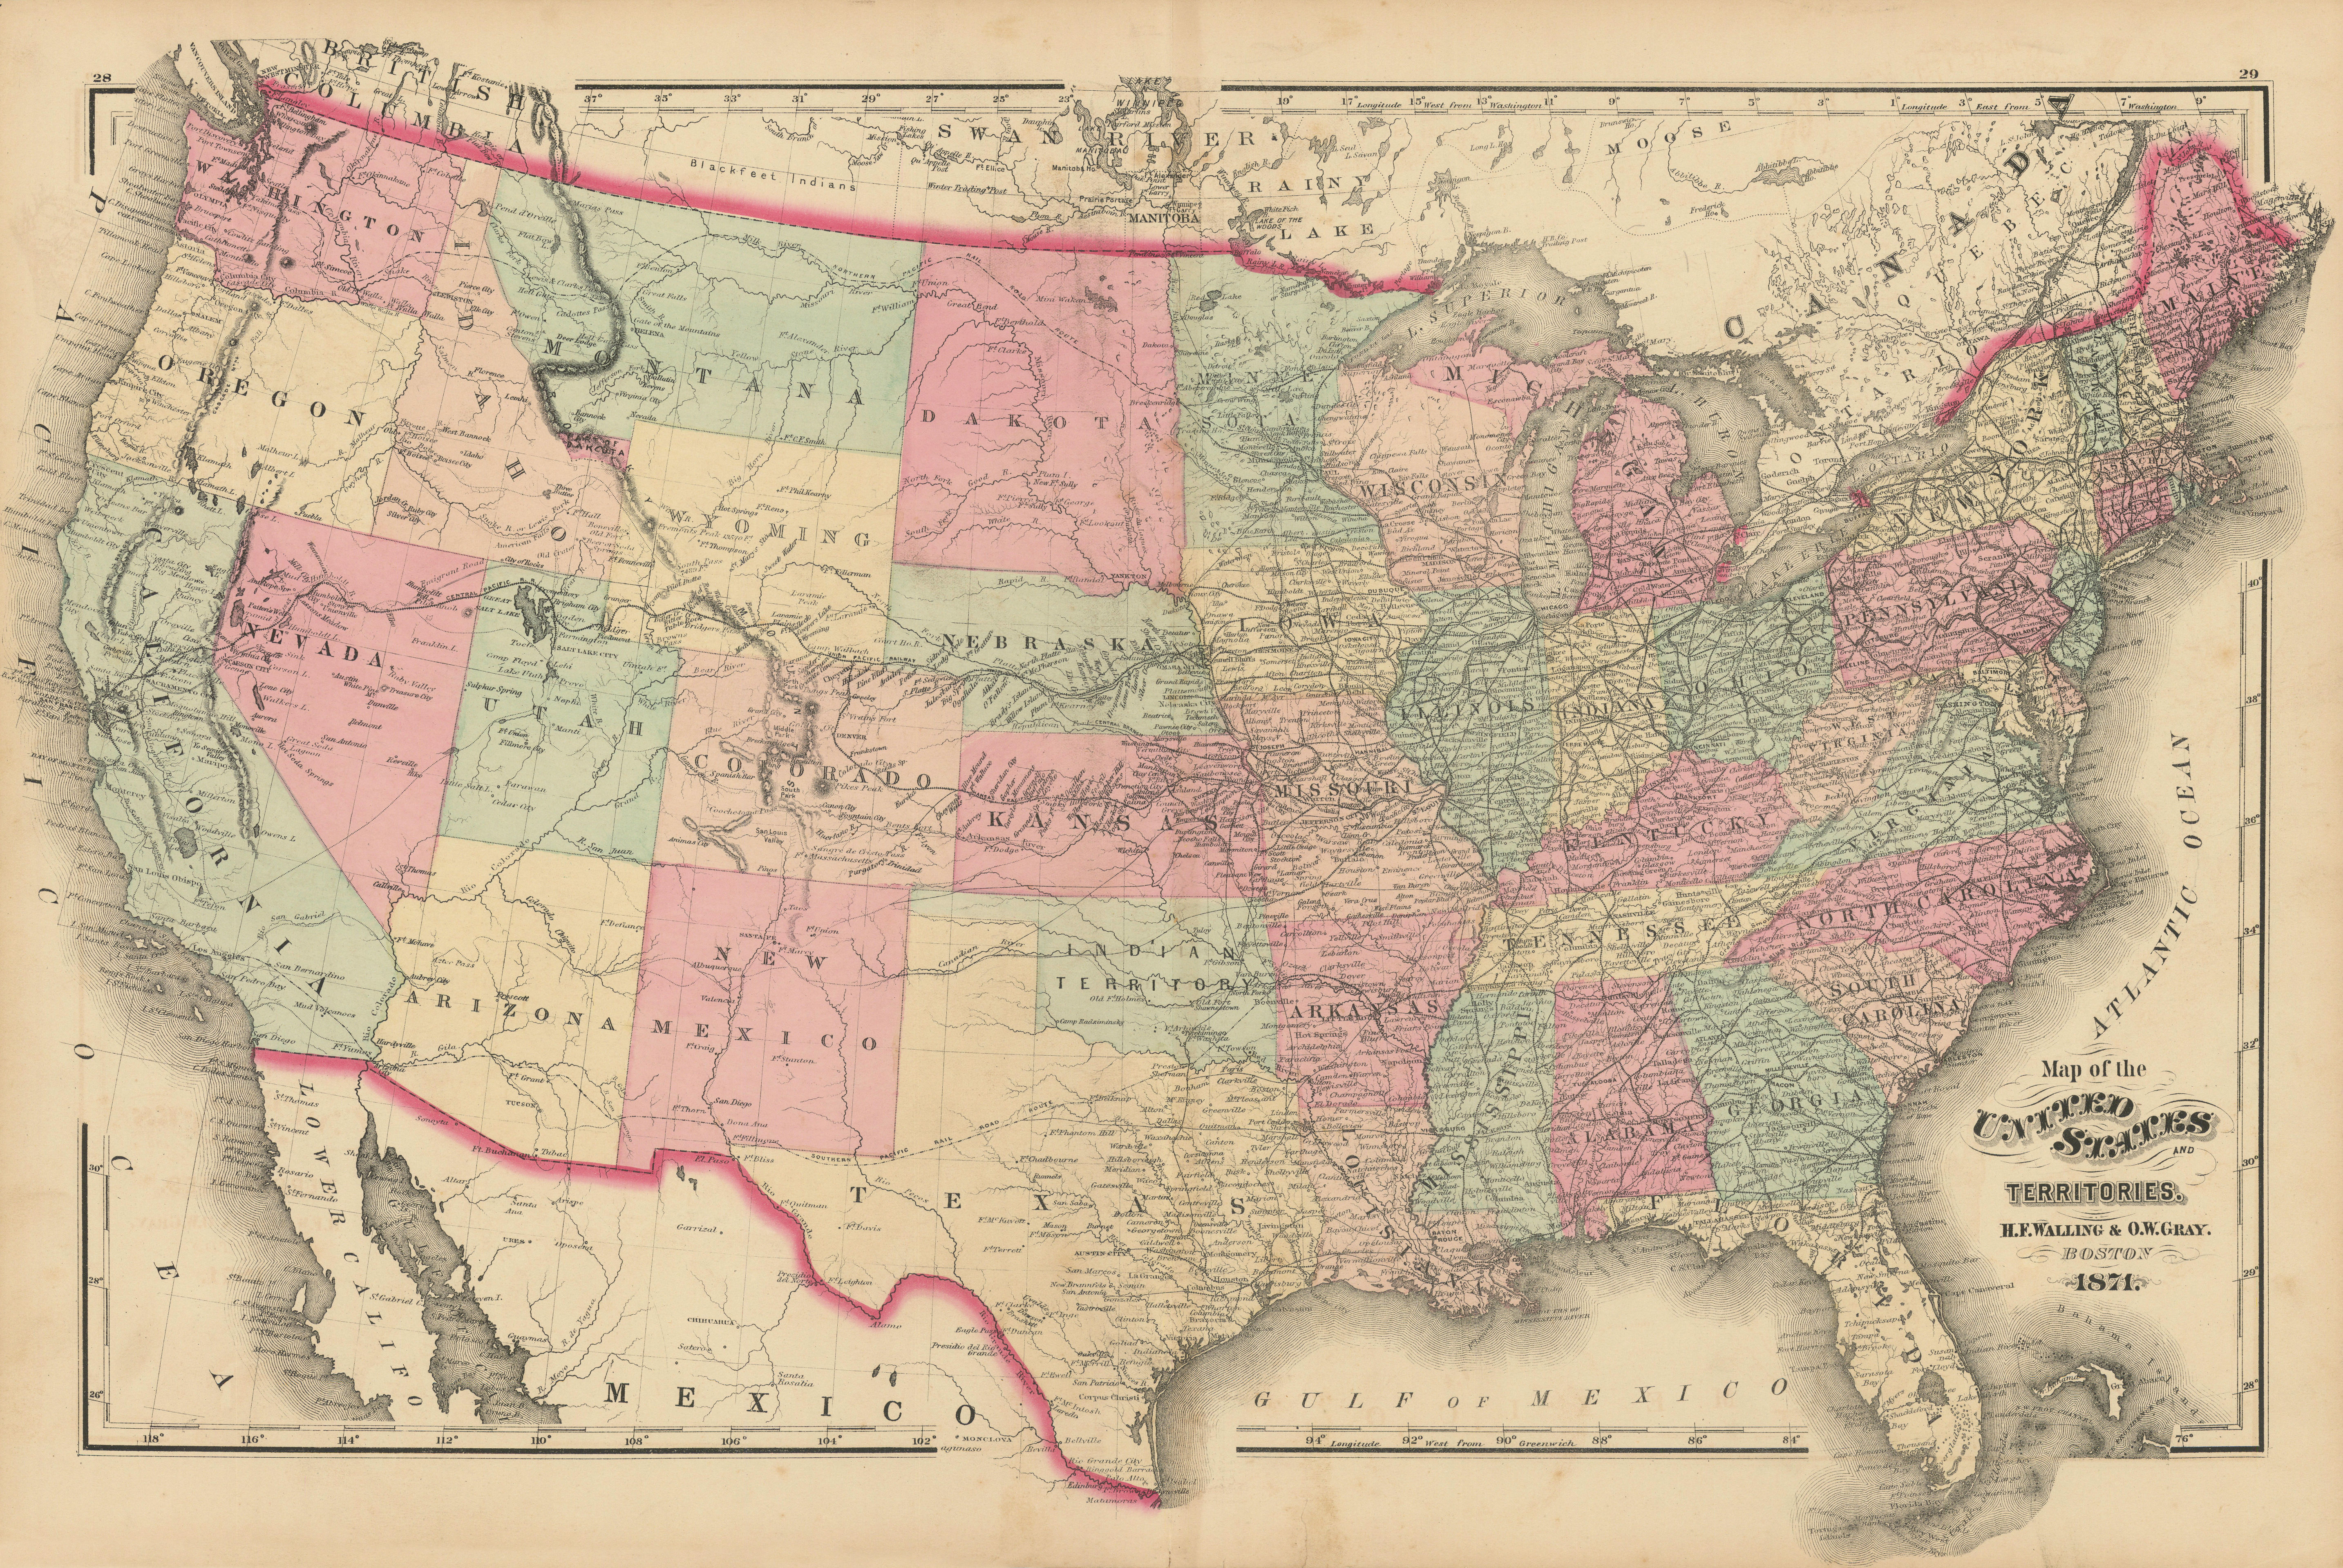 Associate Product Map of the United States and territories by Walling & Gray 1871 old